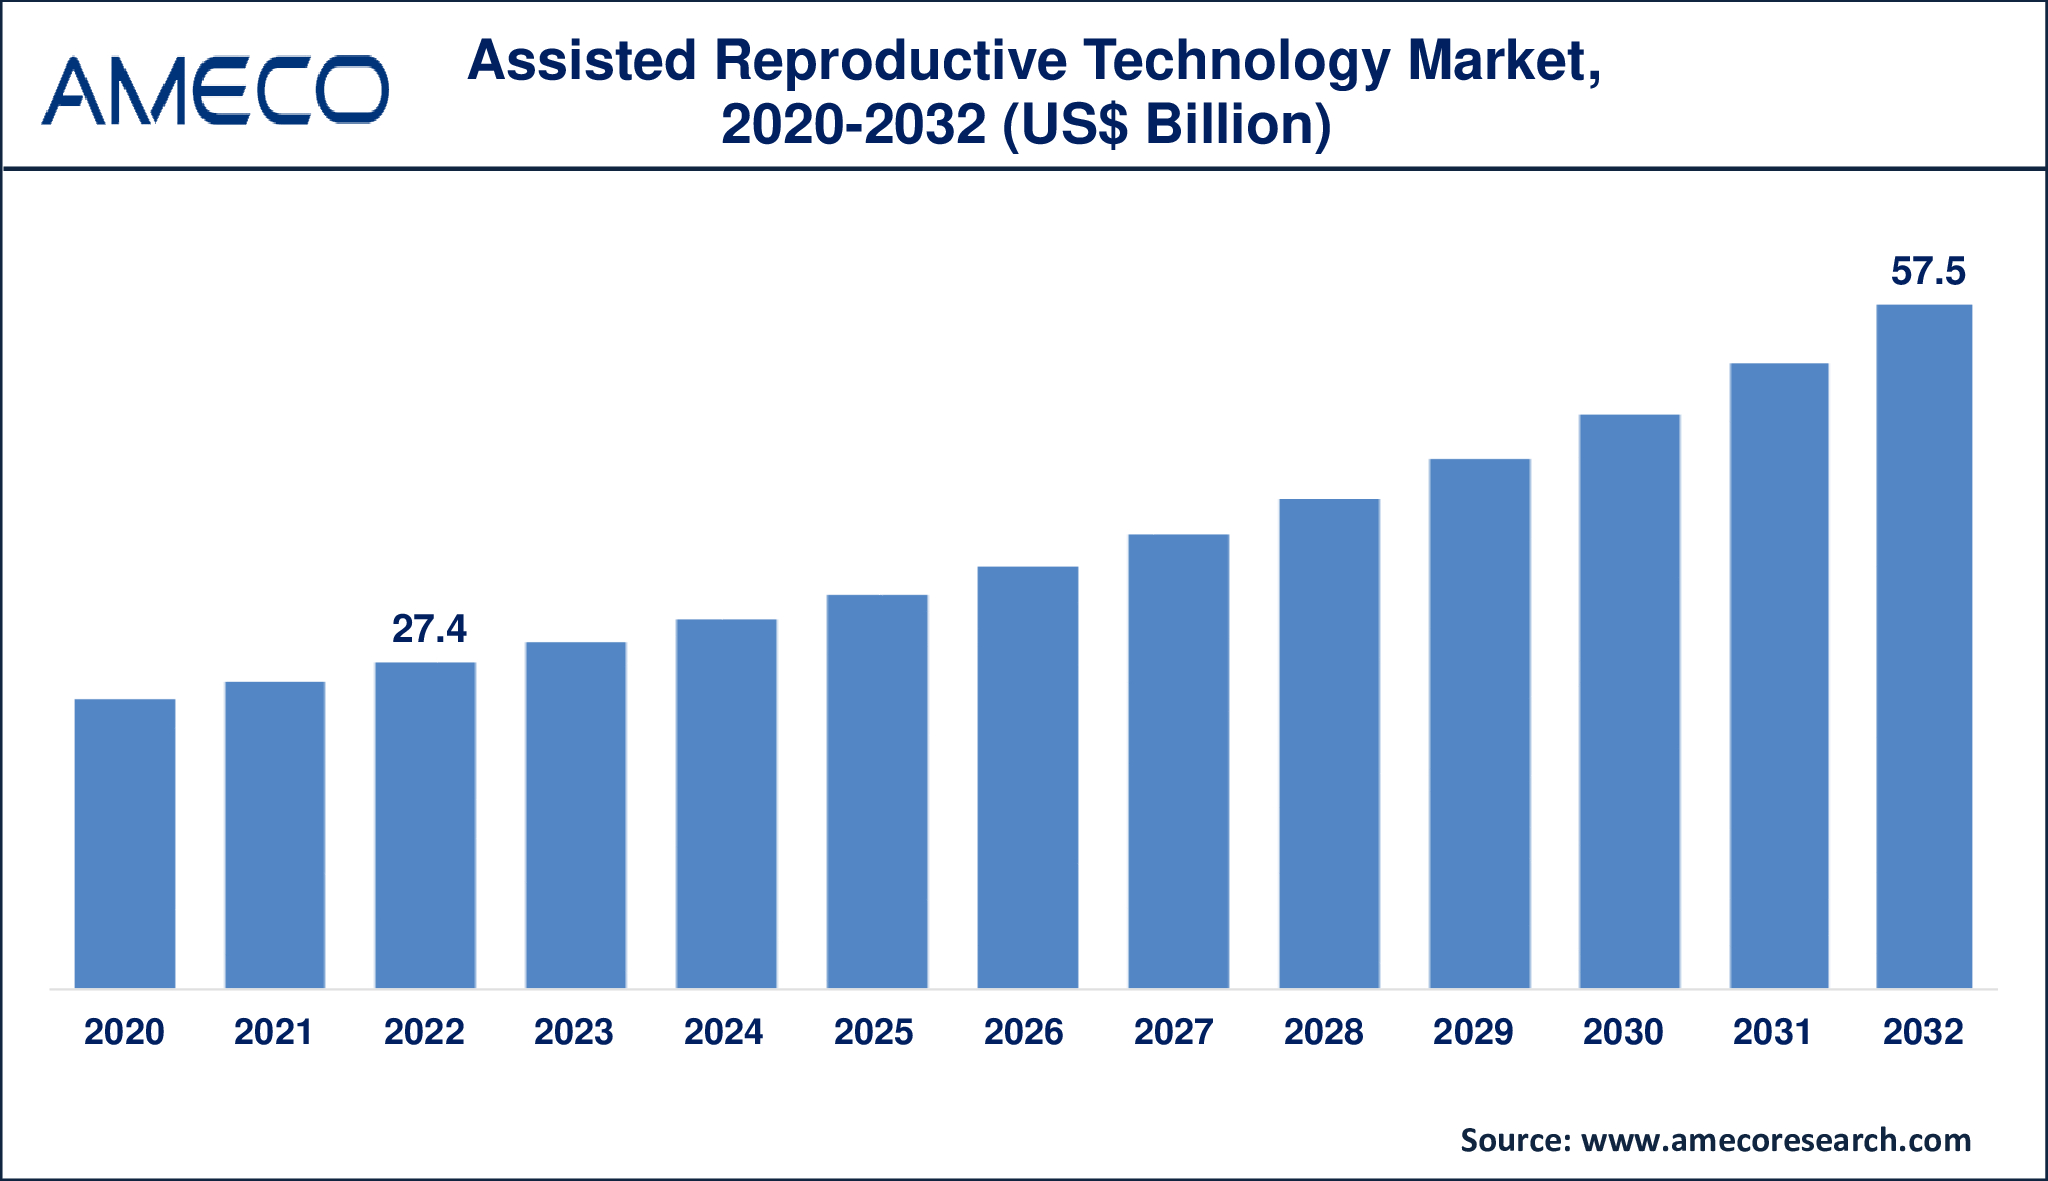 Assisted Reproductive Technology Market Dynamics